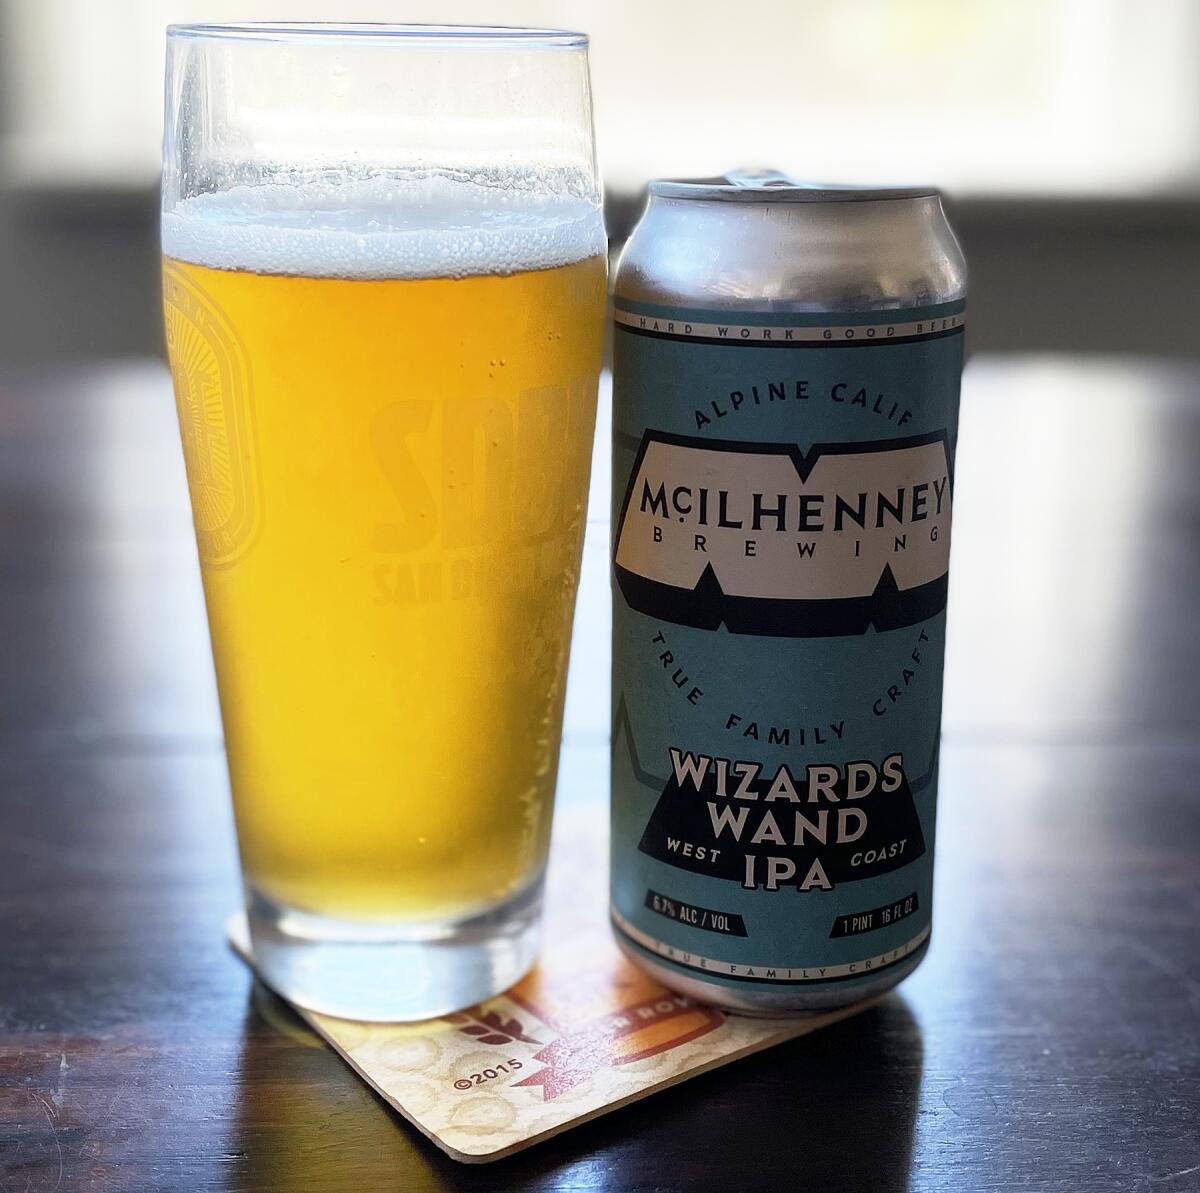 Wizards Wand by McIlhenney Brewing